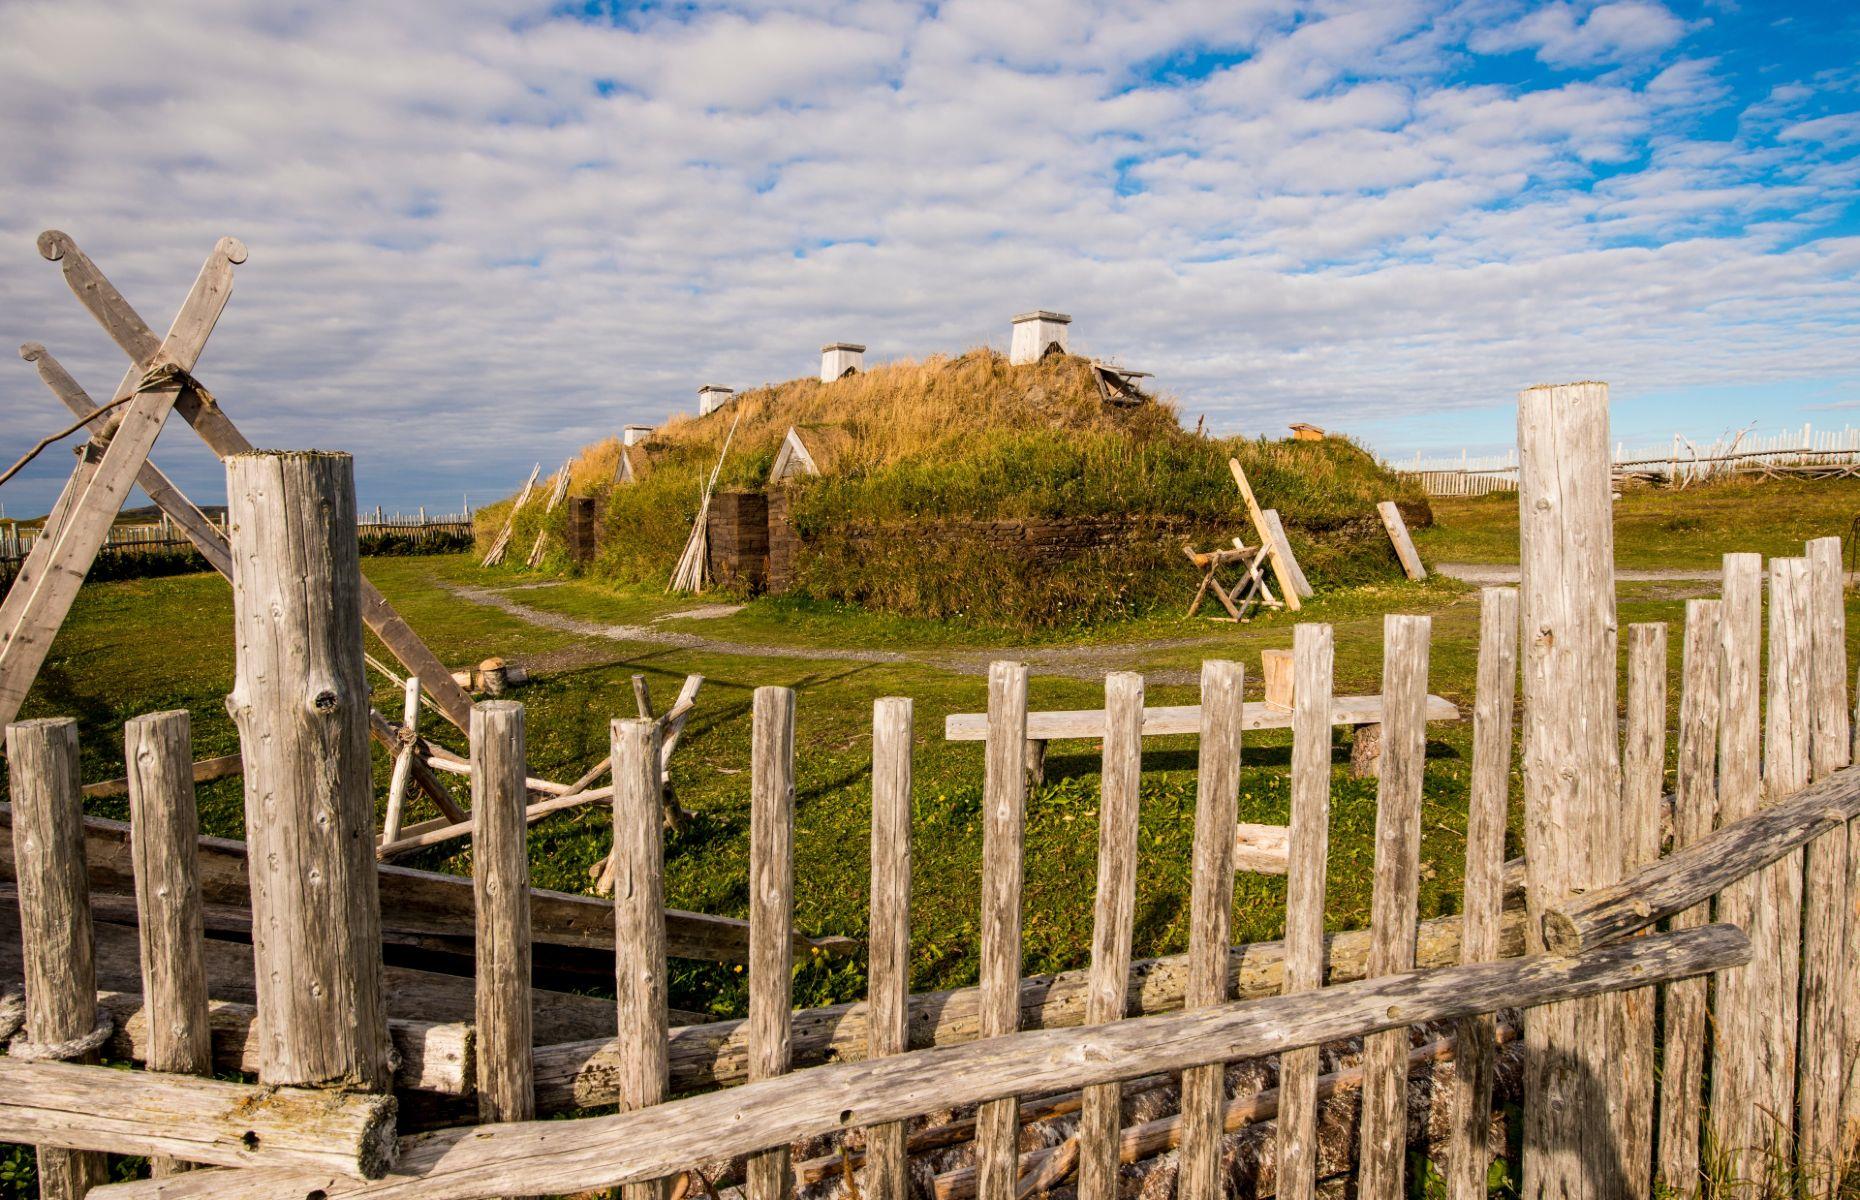 <p>L'Anse aux Meadows isn’t a new archaeological site. Experts have dug there since the 1960s, unearthing evidence of a European Viking settlement in North America that predates Christopher Columbus by centuries.</p>  <p>Recently, scientists used a new method for dating wood samples from the site to work out that the trees they came from were chopped down in 1021. Nobody knows exactly how long the Norse settlers stayed, but at least we now know precisely when some of the structures were built.</p>